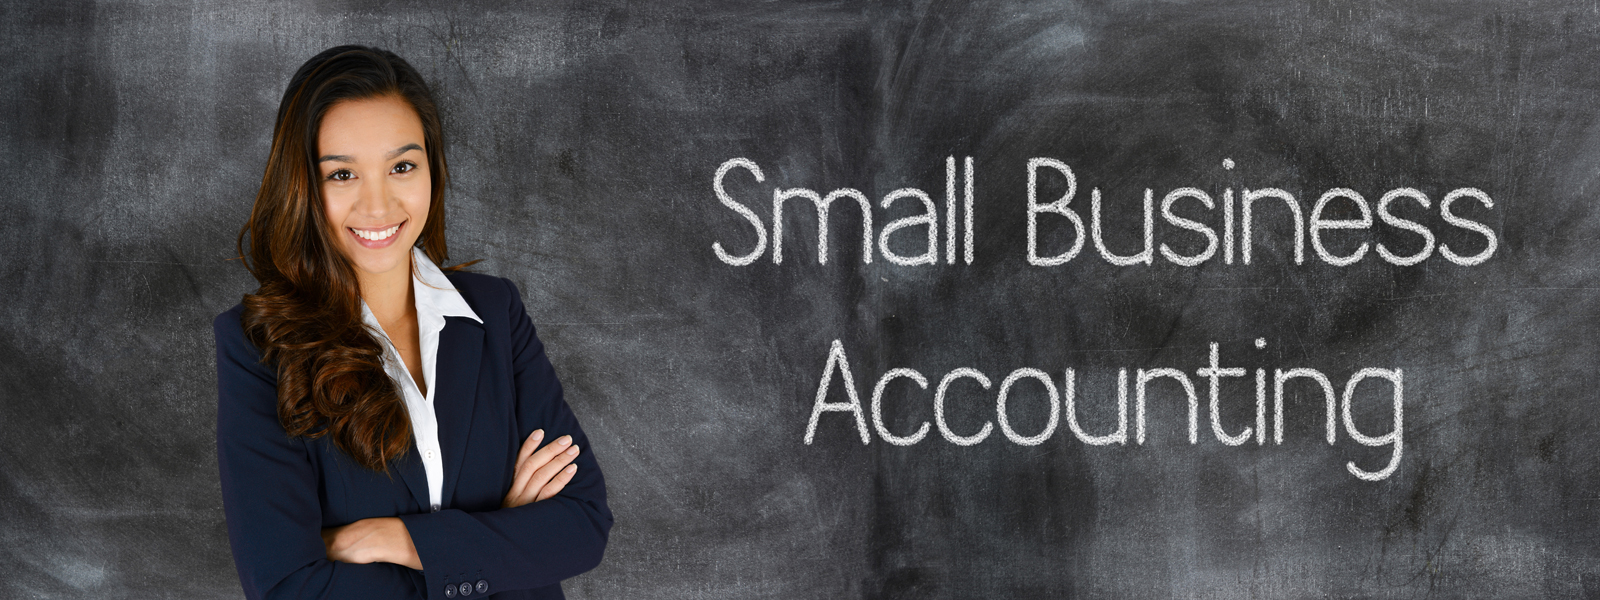 small business bookkeeping services